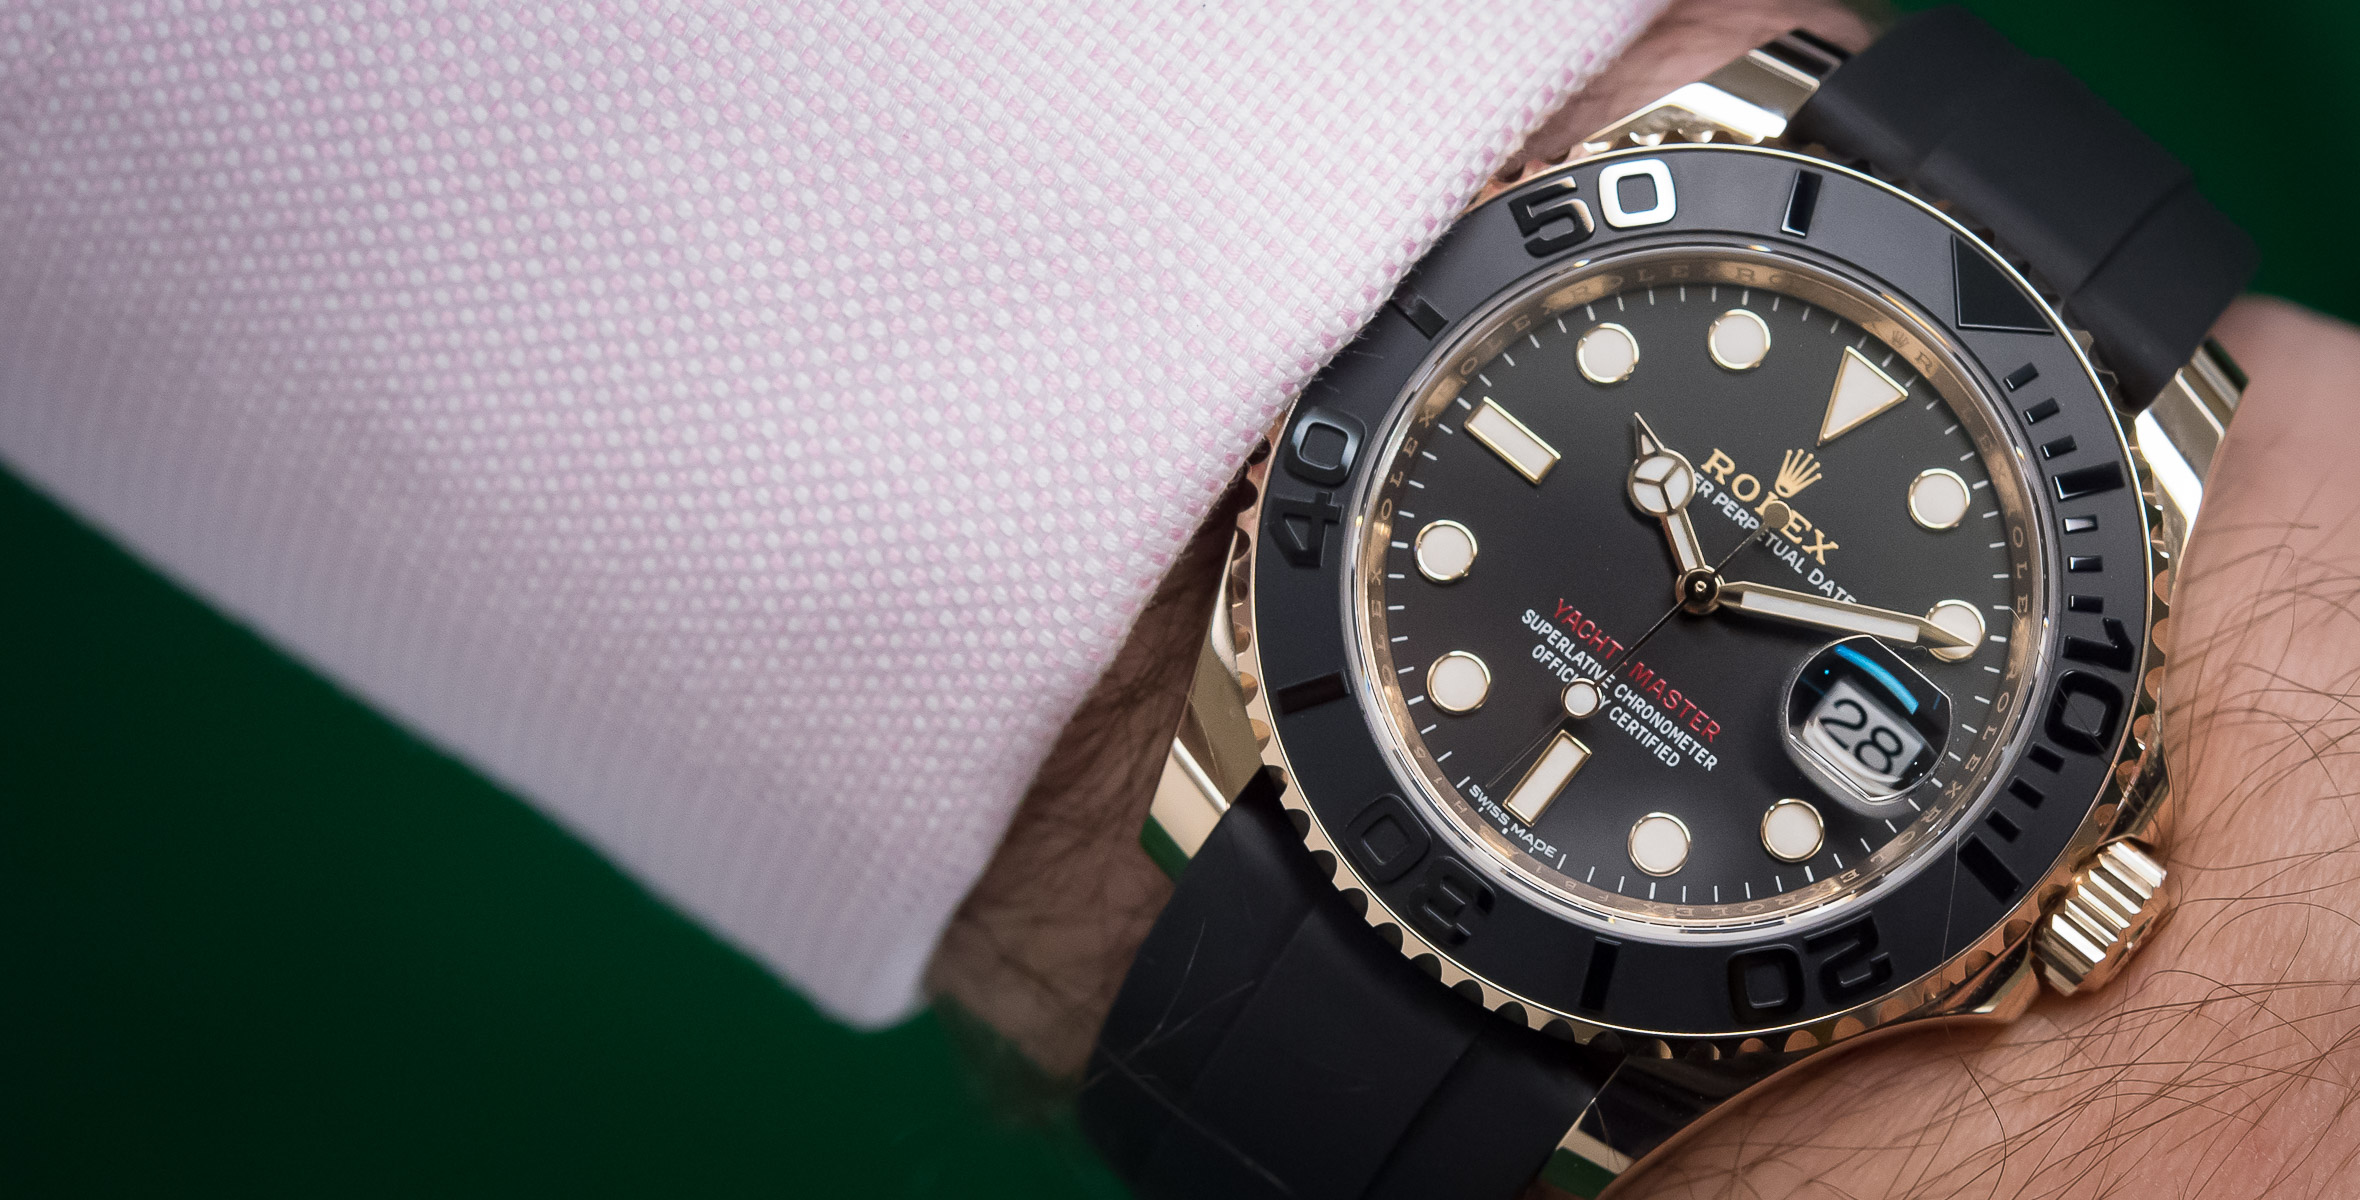 rolex yacht master oyster perpetual date price